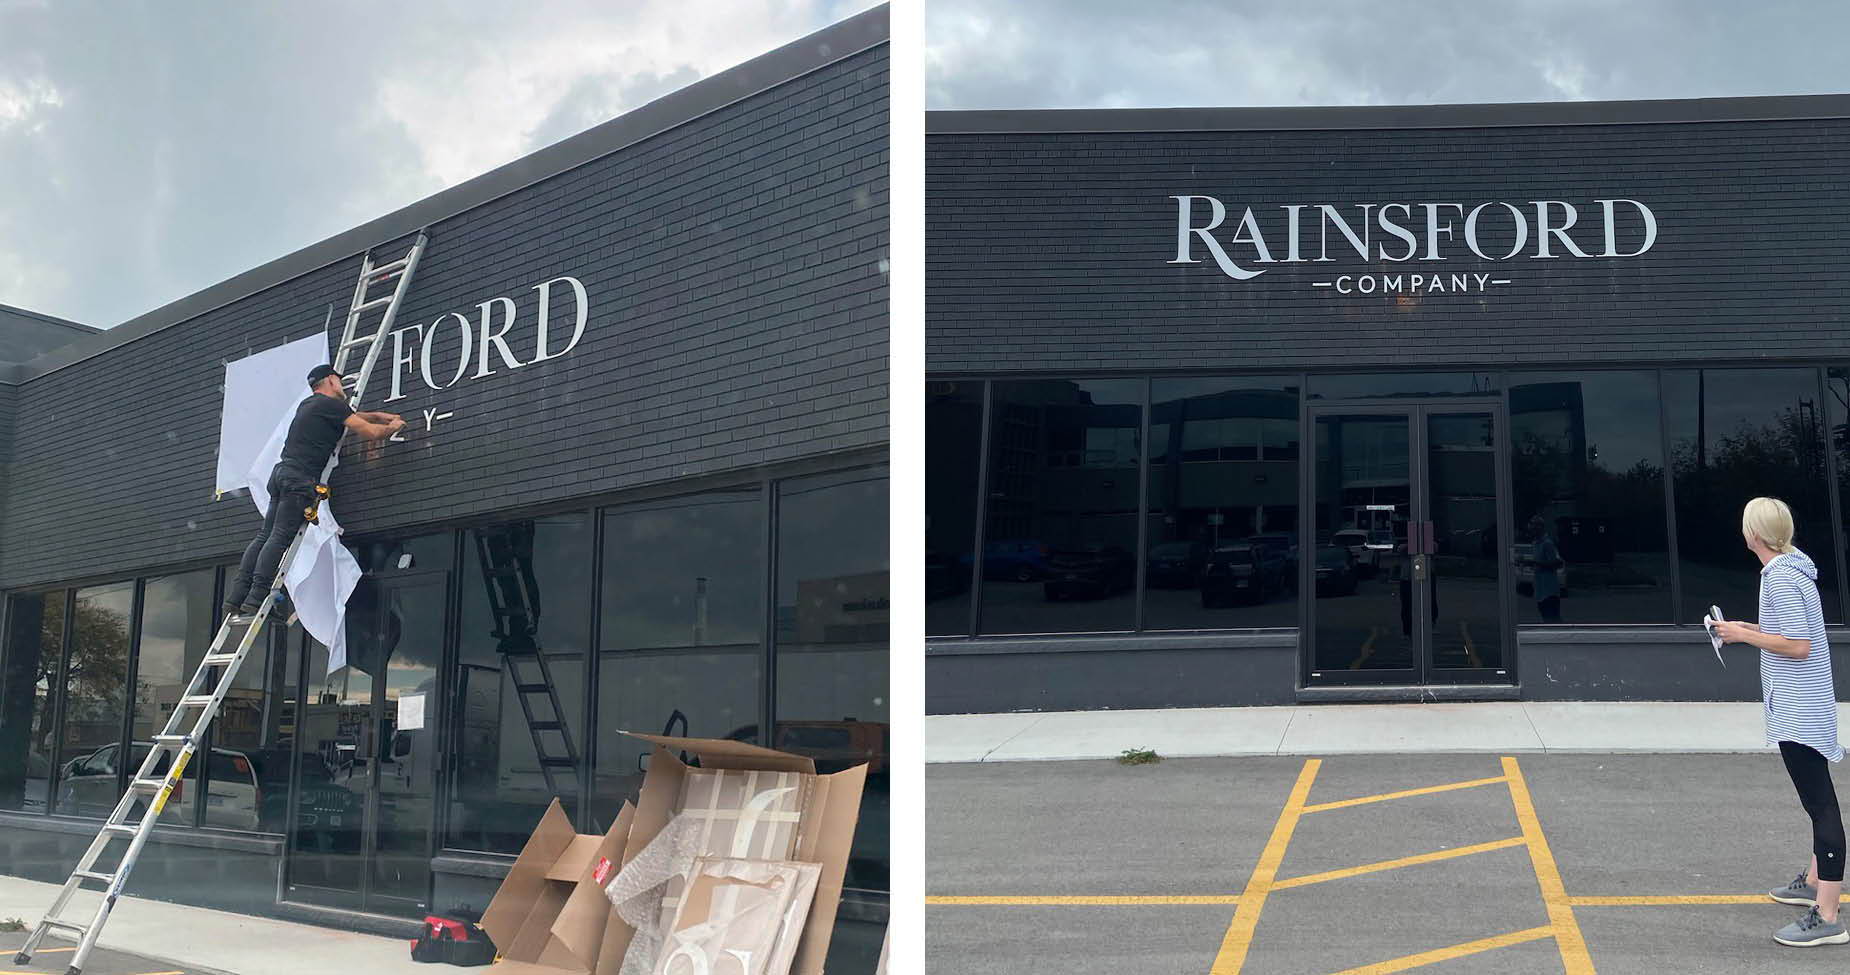 The day the sign went up on Rainsford's brand new studio space.